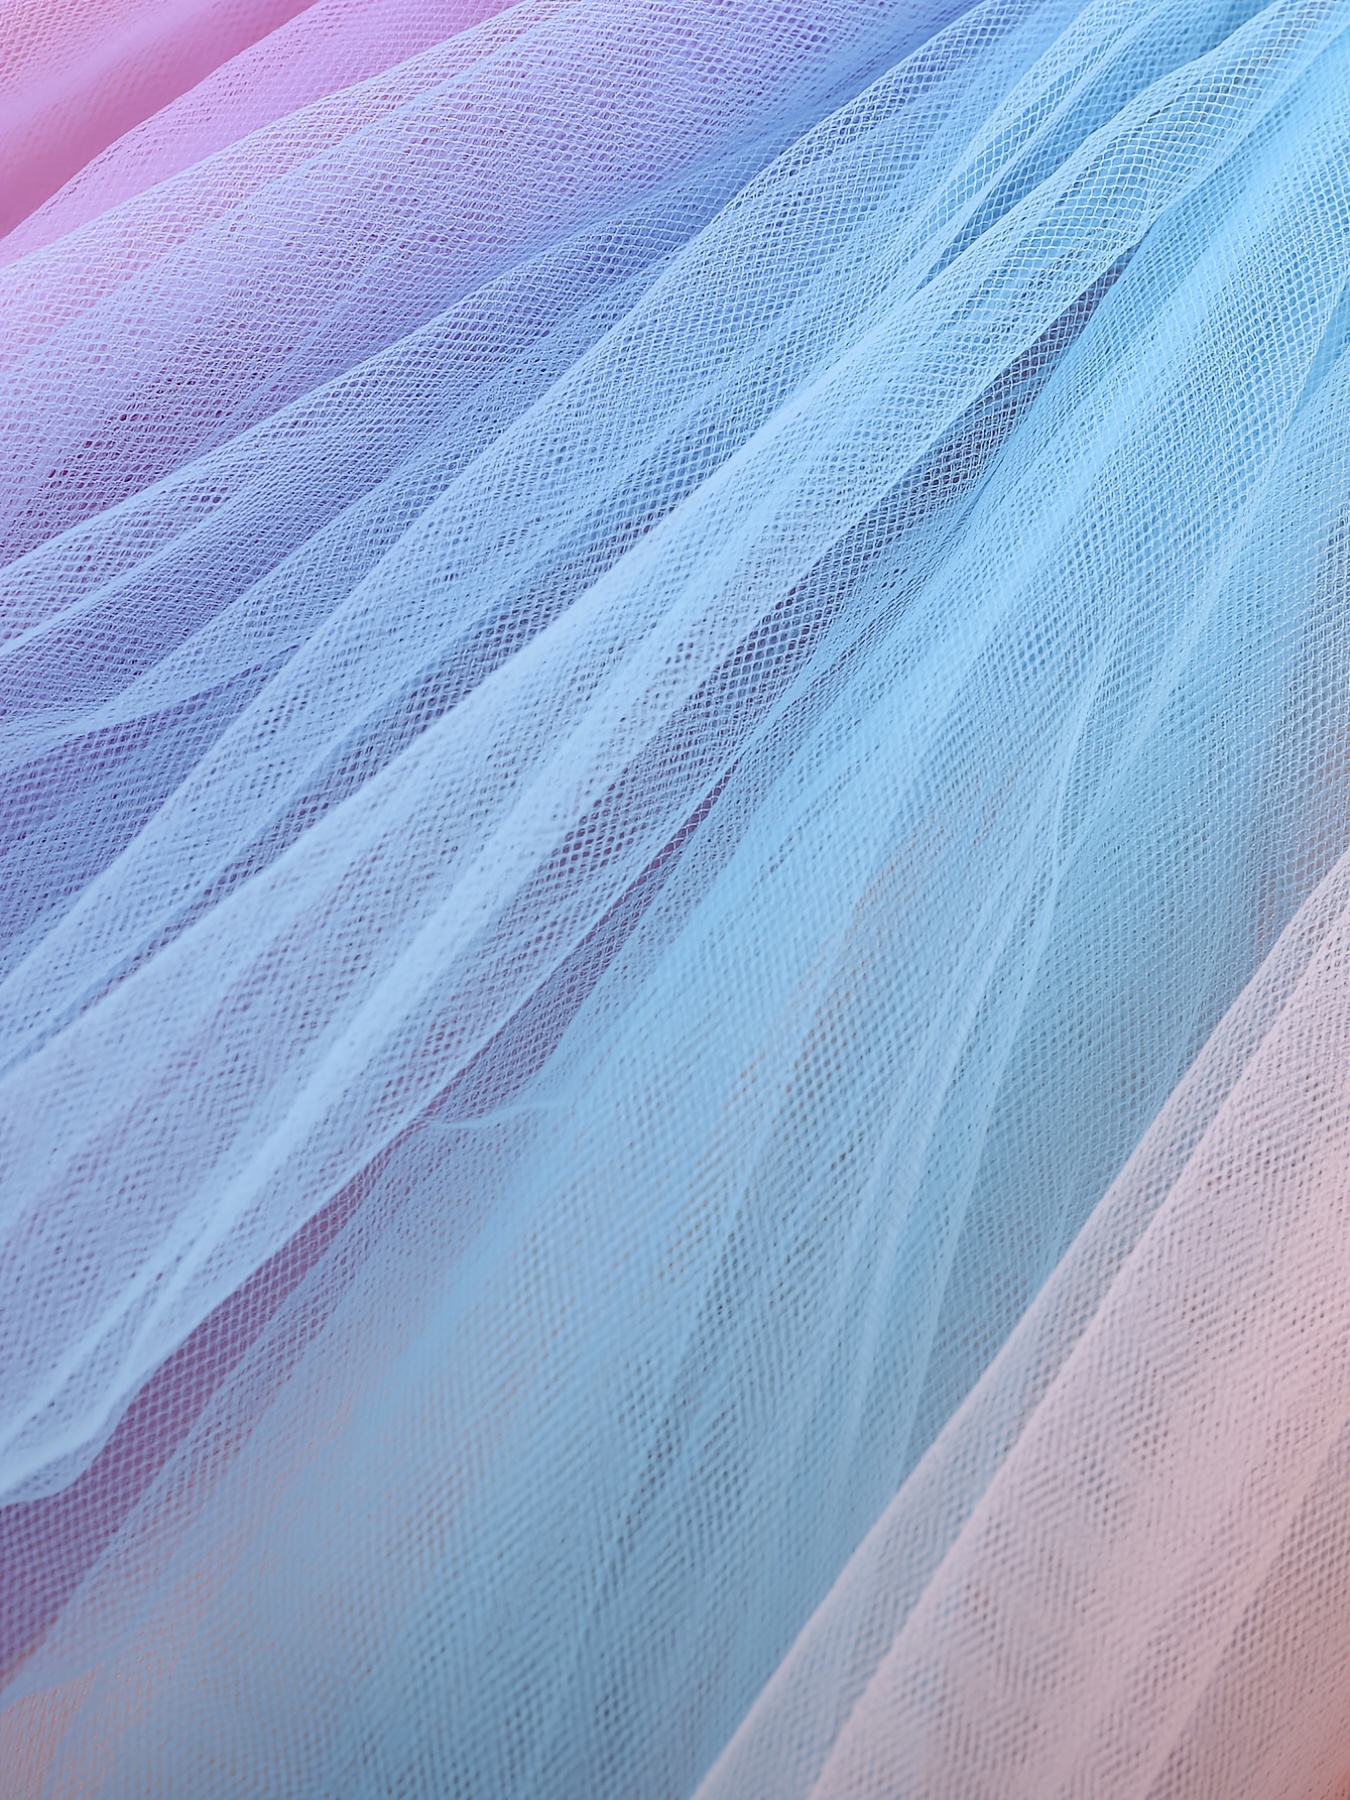 Soft tulle with rainbow colors